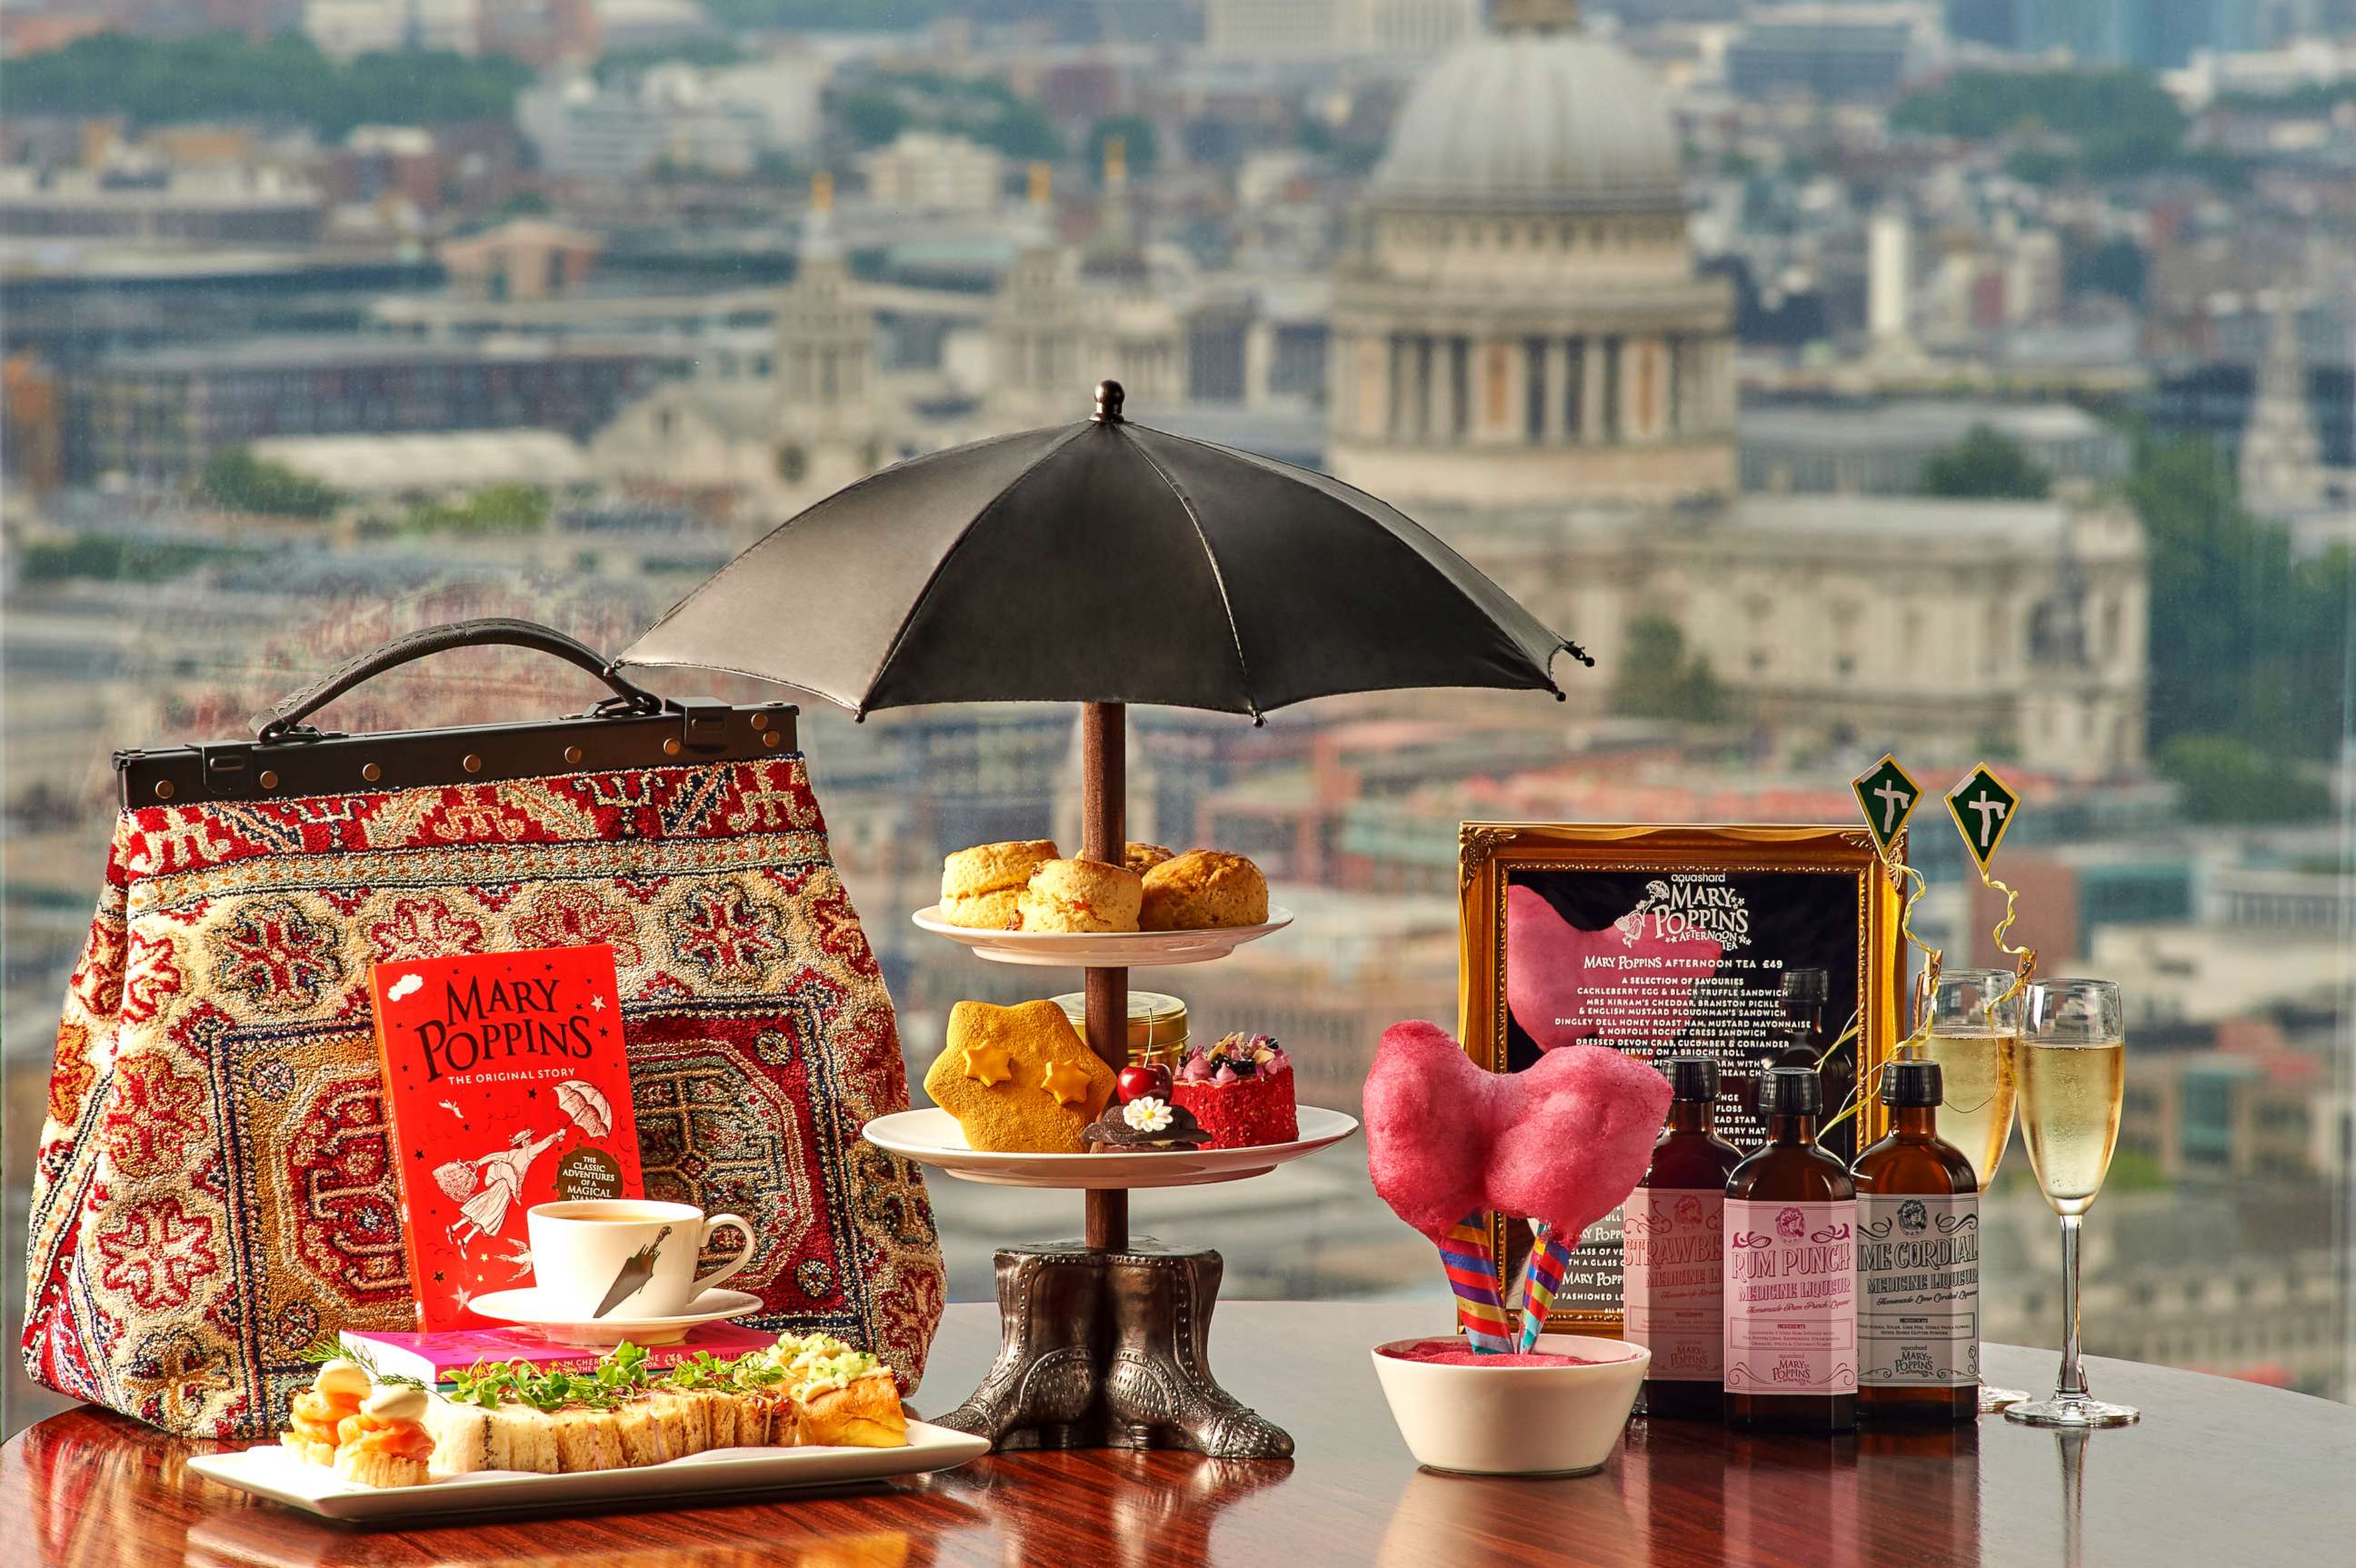 'Mary Poppins' afternoon tea lets you dine like the iconic British